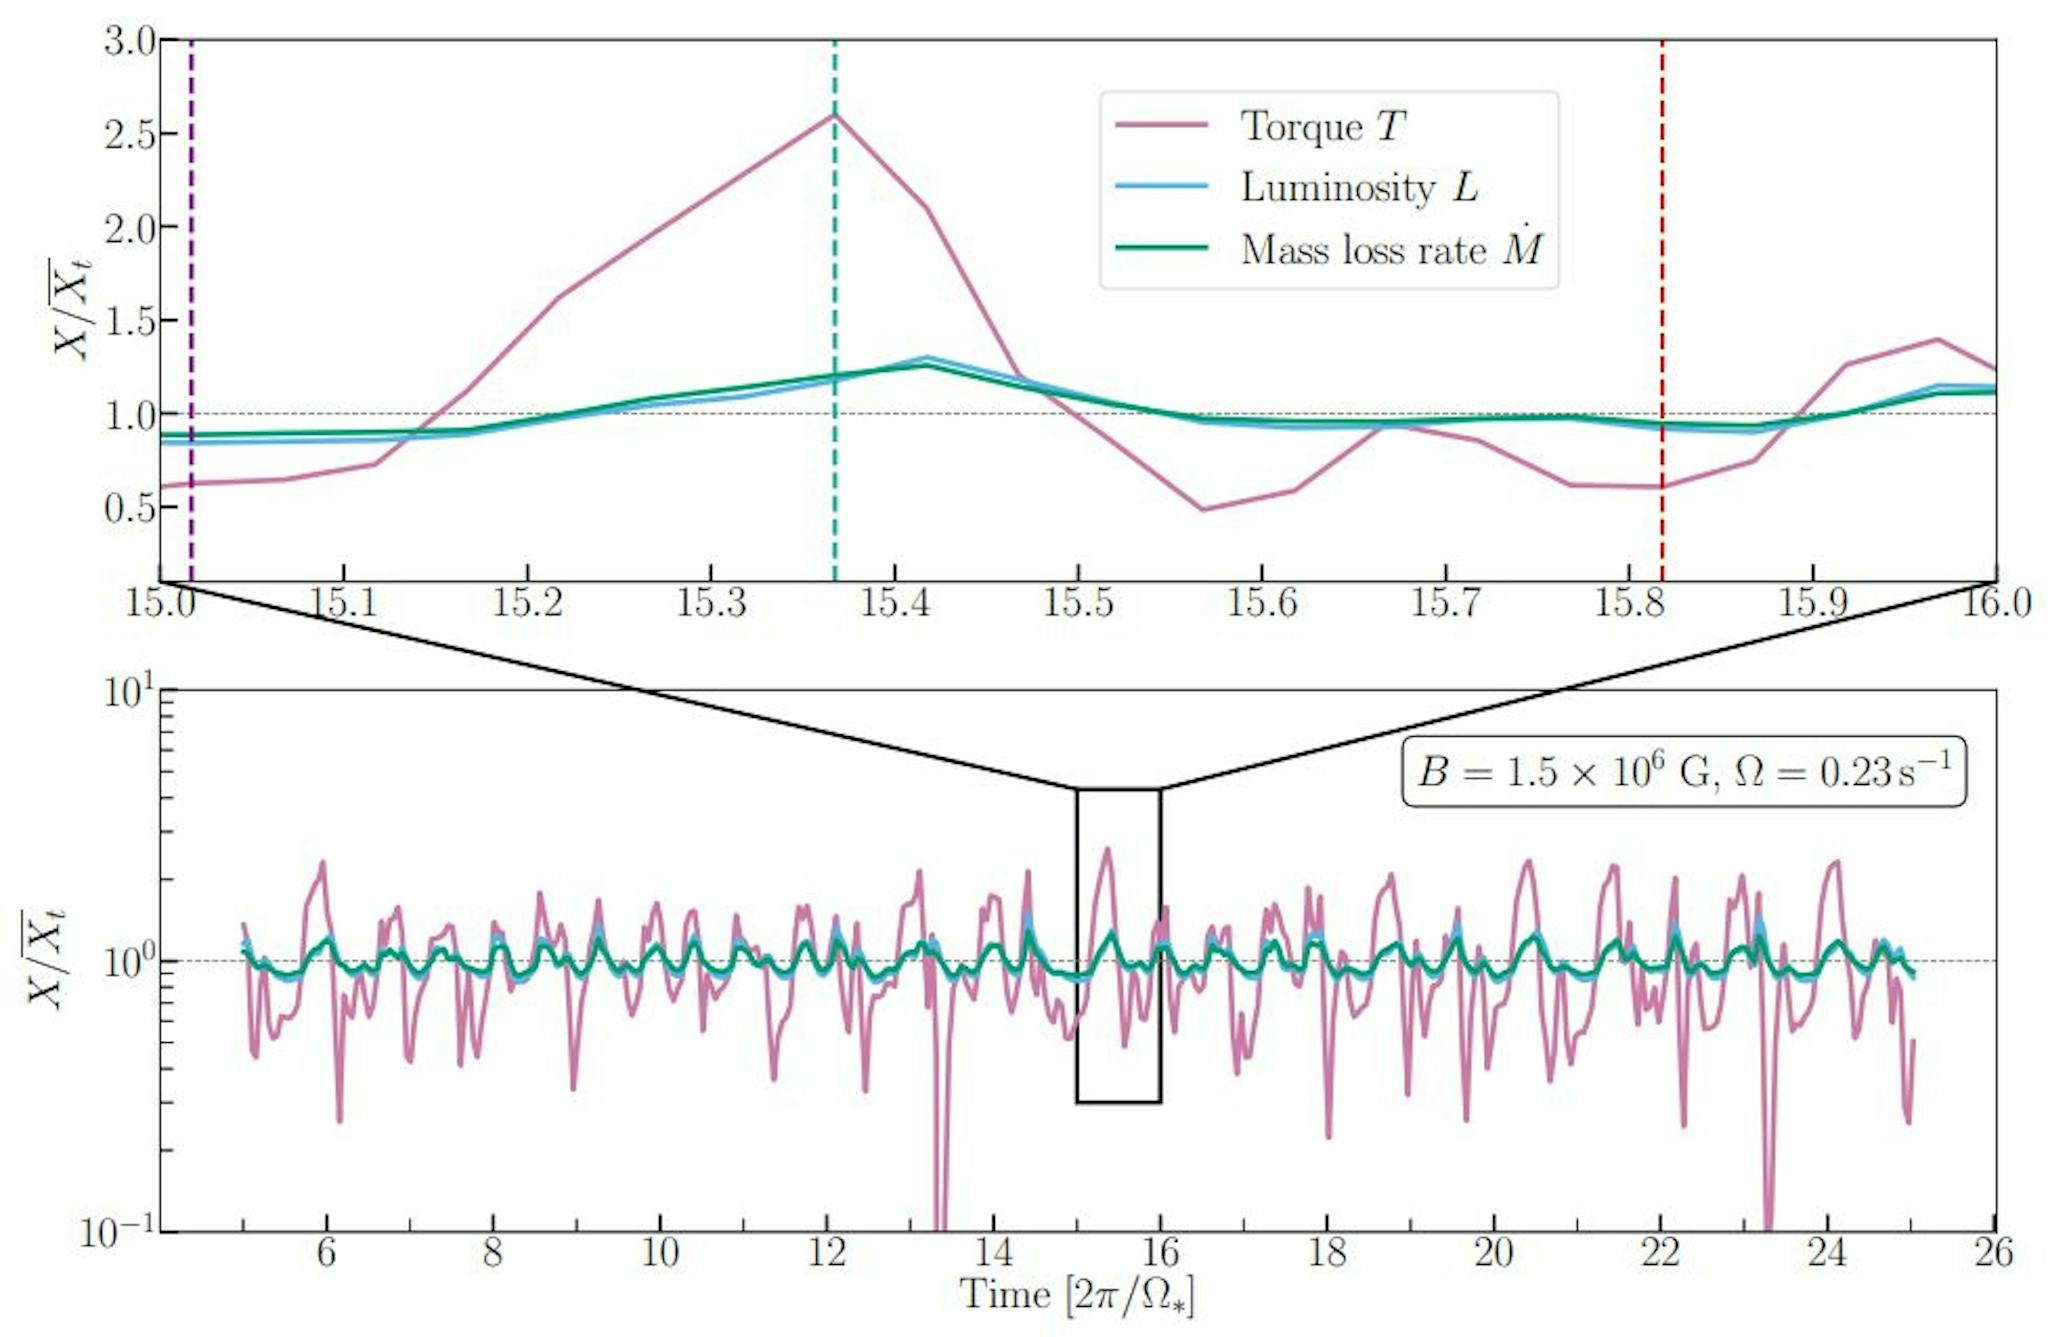 Figure 3. Time evolution of mass loss rate M˙, luminosity L, and torque T of the rotating magnetic wind of B1.5e6Ω0.23estimated at the outer boundary of the computational domain. The quantities are normalized by the time-averaged values.
The upper panel displays a close-up view of a rotation period (t = 15-16 [2π/Ω∗]), where the vertical dashed lines indicate the timings of pre-eruption, eruption, and post-eruption highlighted in Fig. 2.